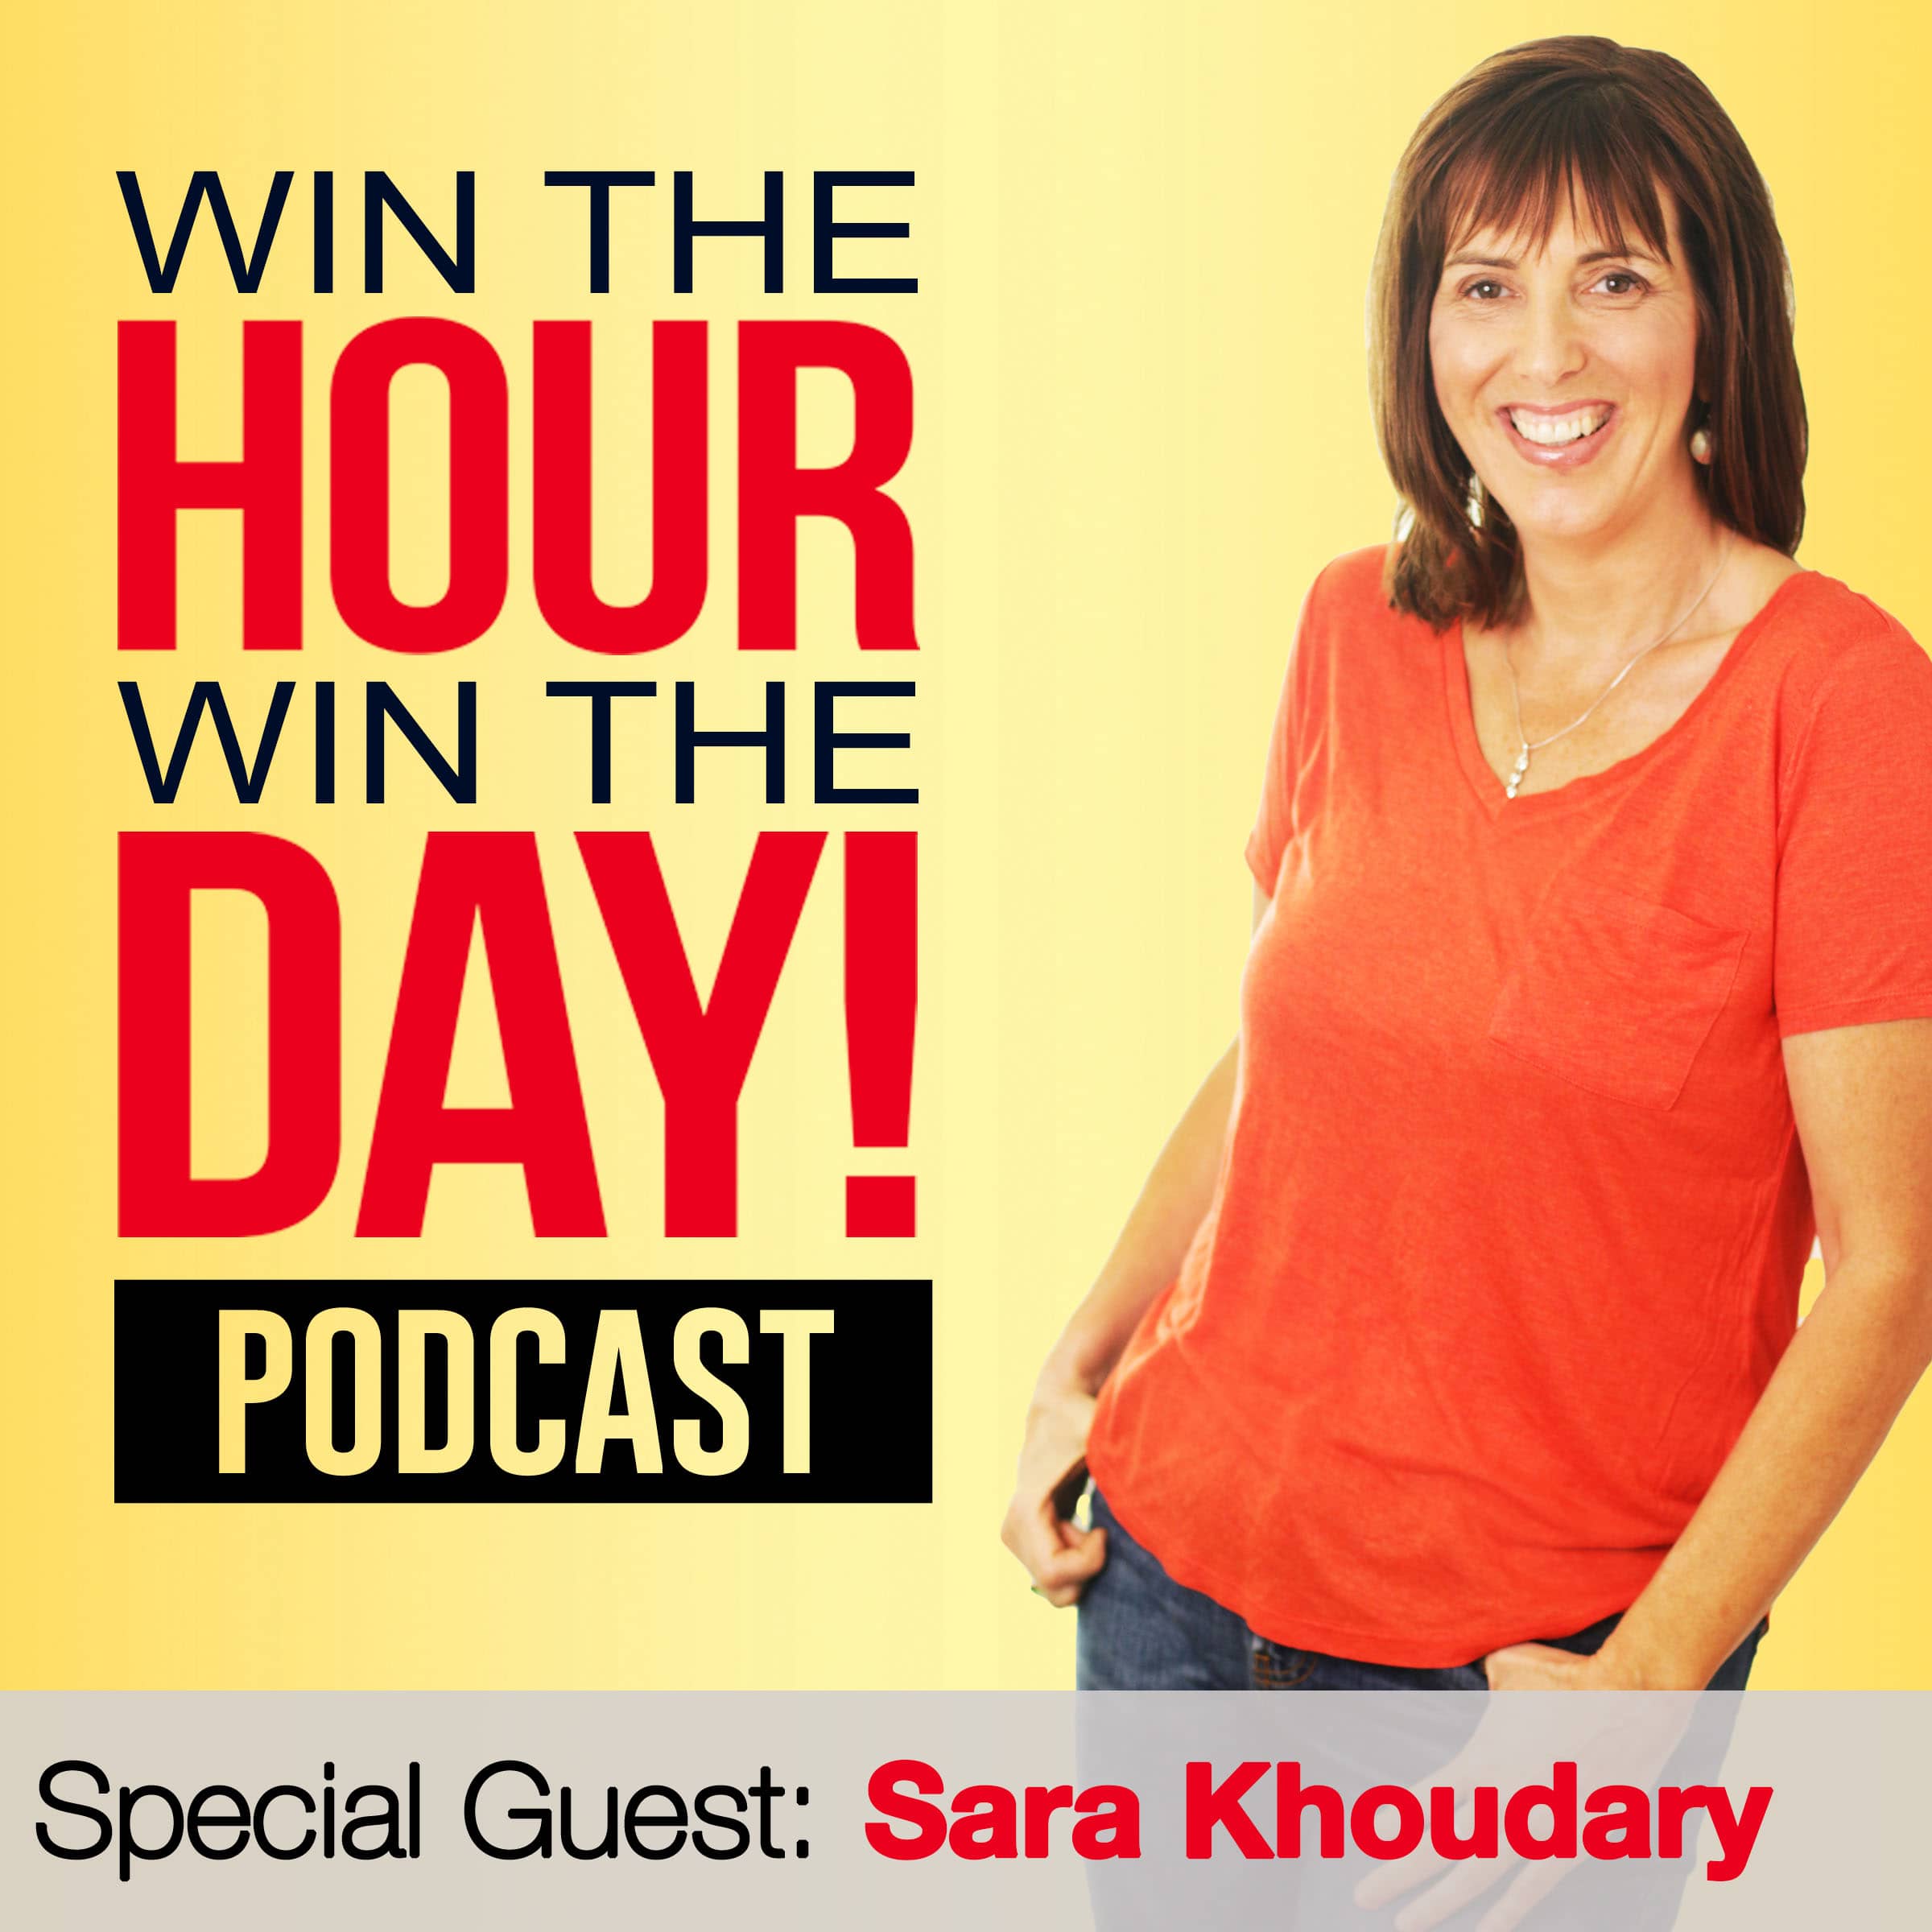 Get Real Connections On Linkedin And Create More! With Sara Khoudary